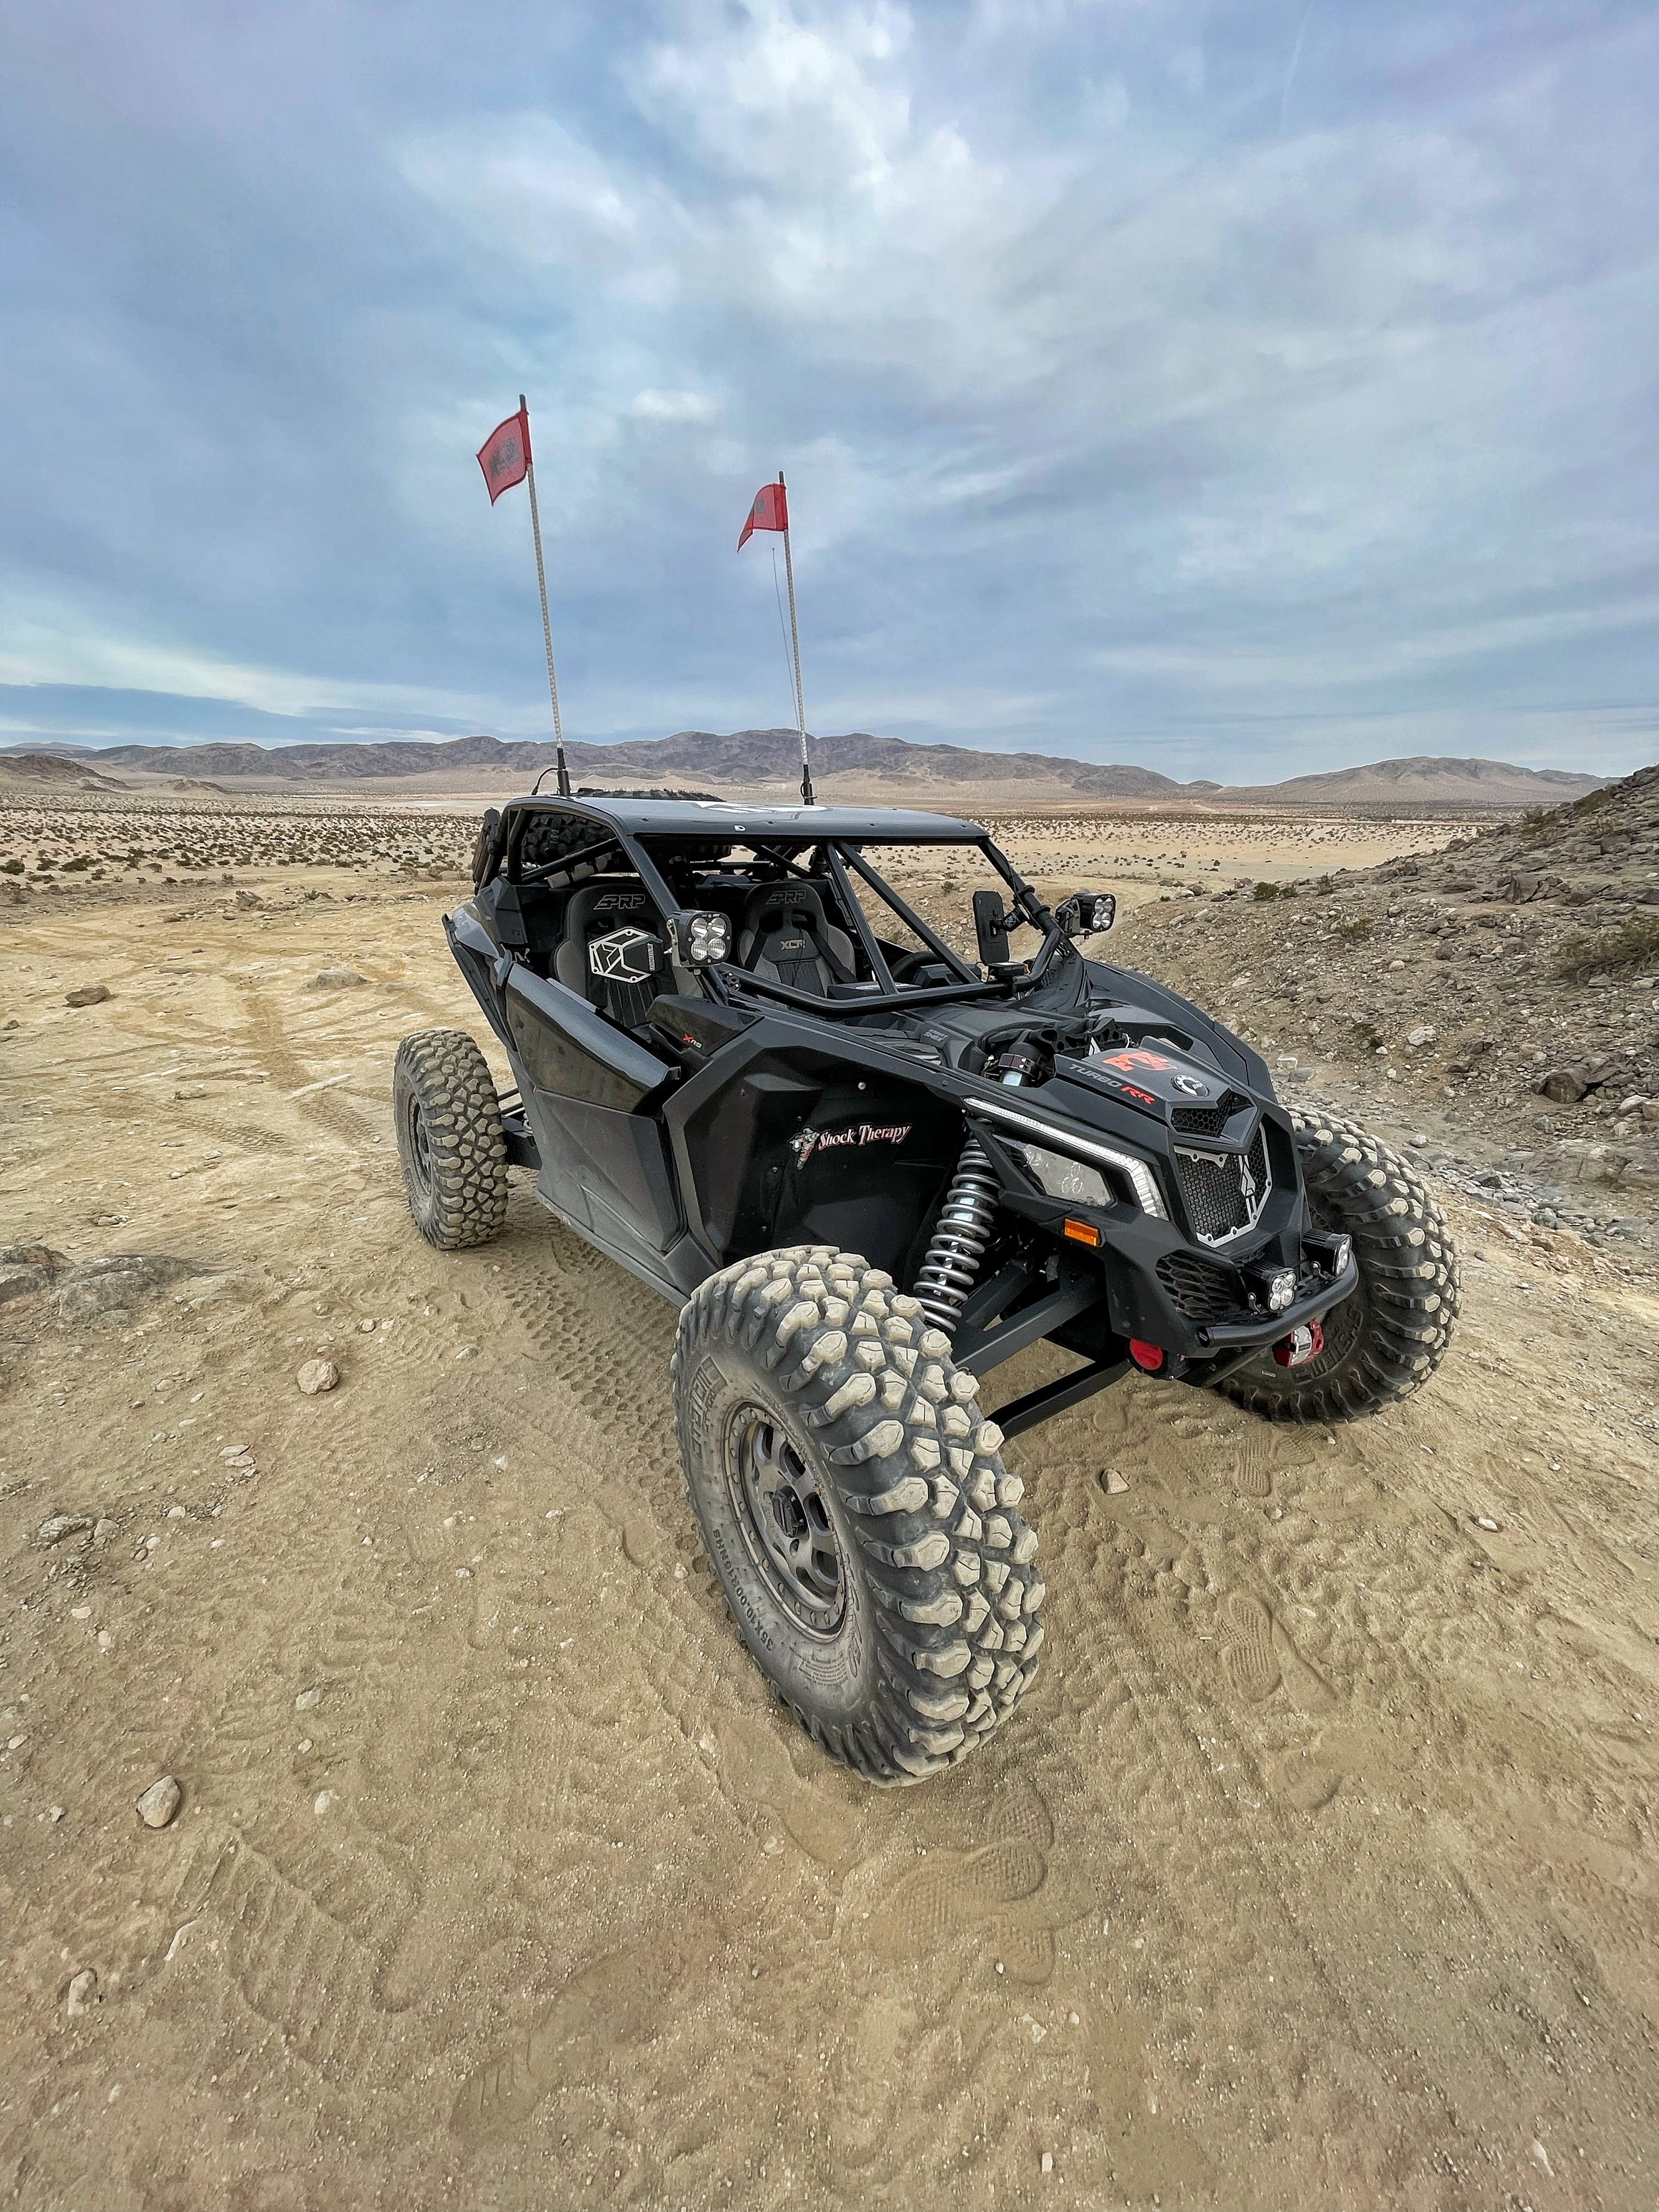 Custom-built black Can-Am side-by-side idling in the dirt with two red pennants.